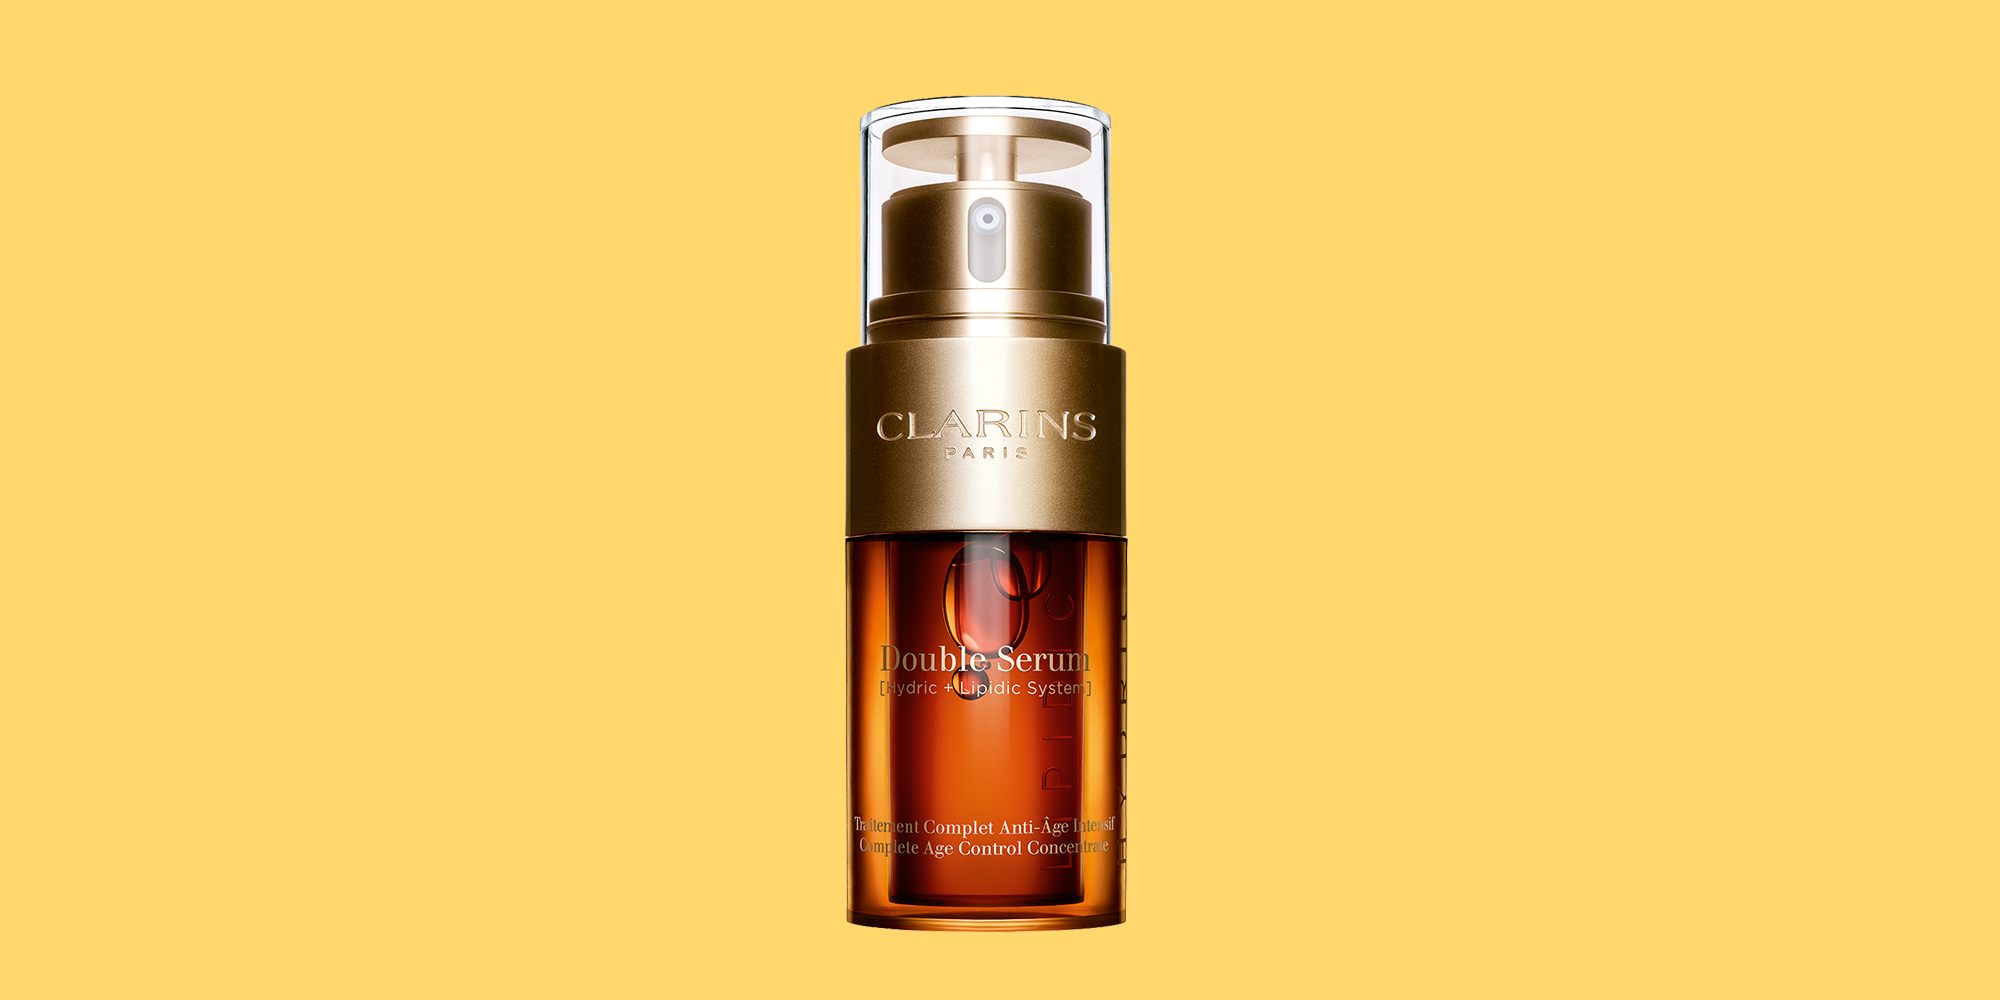 double serum clarins traitement complet anti age intensif)